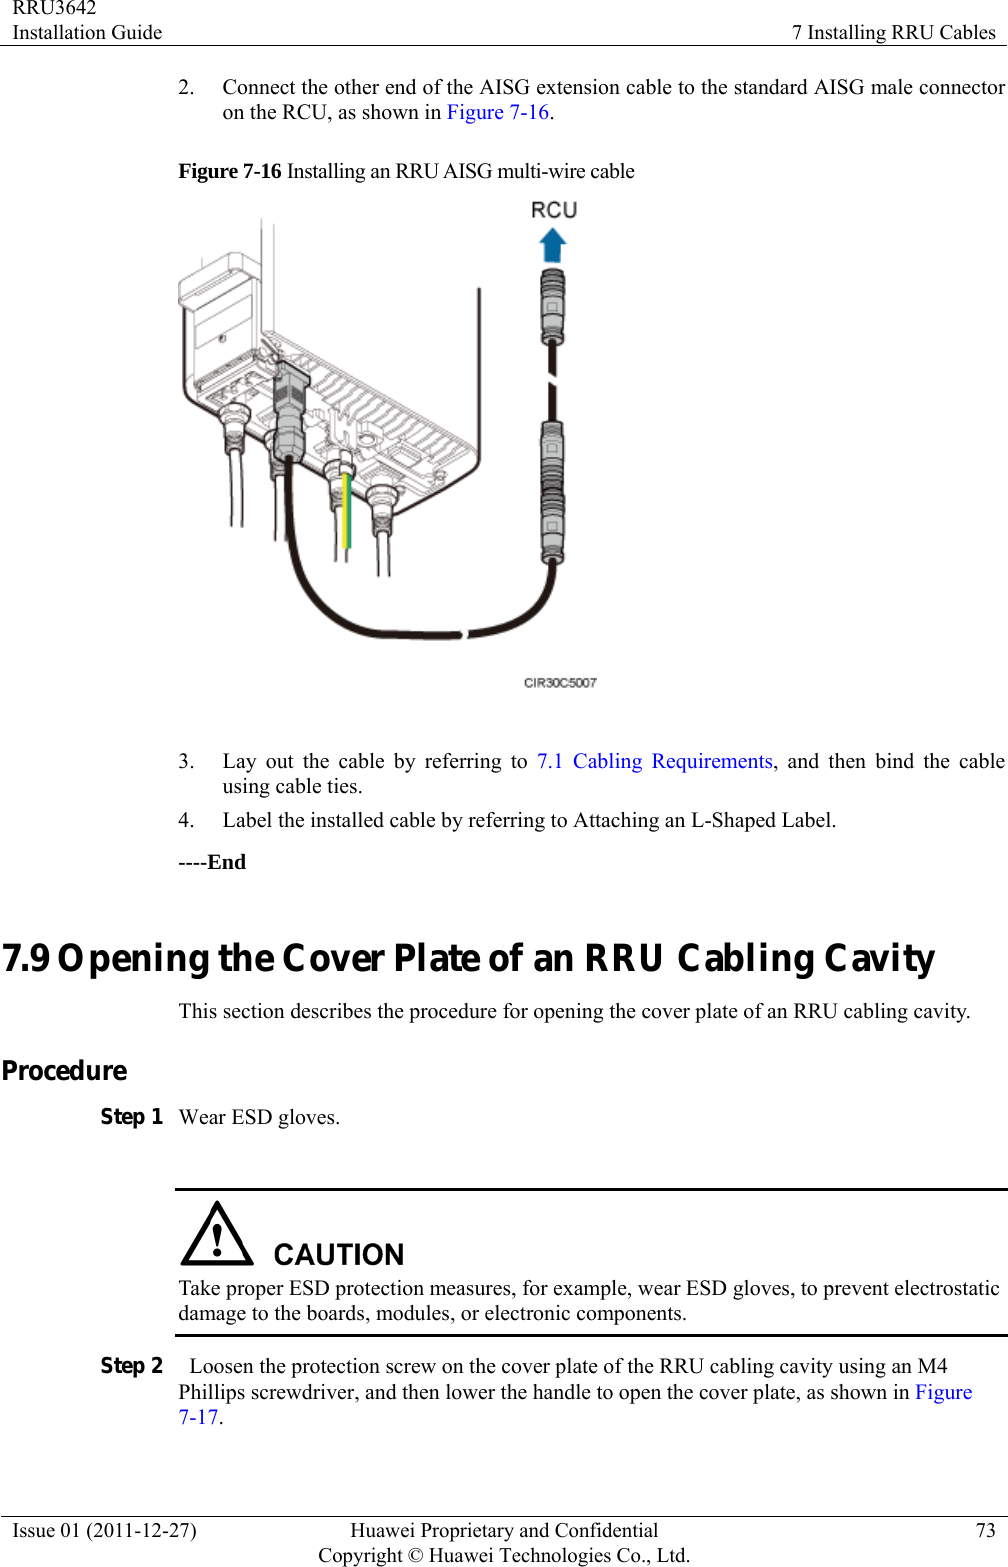 RRU3642 Installation Guide  7 Installing RRU Cables Issue 01 (2011-12-27)  Huawei Proprietary and Confidential         Copyright © Huawei Technologies Co., Ltd.73 2. Connect the other end of the AISG extension cable to the standard AISG male connector on the RCU, as shown in Figure 7-16. Figure 7-16 Installing an RRU AISG multi-wire cable   3. Lay out the cable by referring to 7.1 Cabling Requirements, and then bind the cable using cable ties. 4. Label the installed cable by referring to Attaching an L-Shaped Label. ----End 7.9 Opening the Cover Plate of an RRU Cabling Cavity This section describes the procedure for opening the cover plate of an RRU cabling cavity. Procedure Step 1 Wear ESD gloves.   Take proper ESD protection measures, for example, wear ESD gloves, to prevent electrostatic damage to the boards, modules, or electronic components. Step 2   Loosen the protection screw on the cover plate of the RRU cabling cavity using an M4 Phillips screwdriver, and then lower the handle to open the cover plate, as shown in Figure 7-17. 